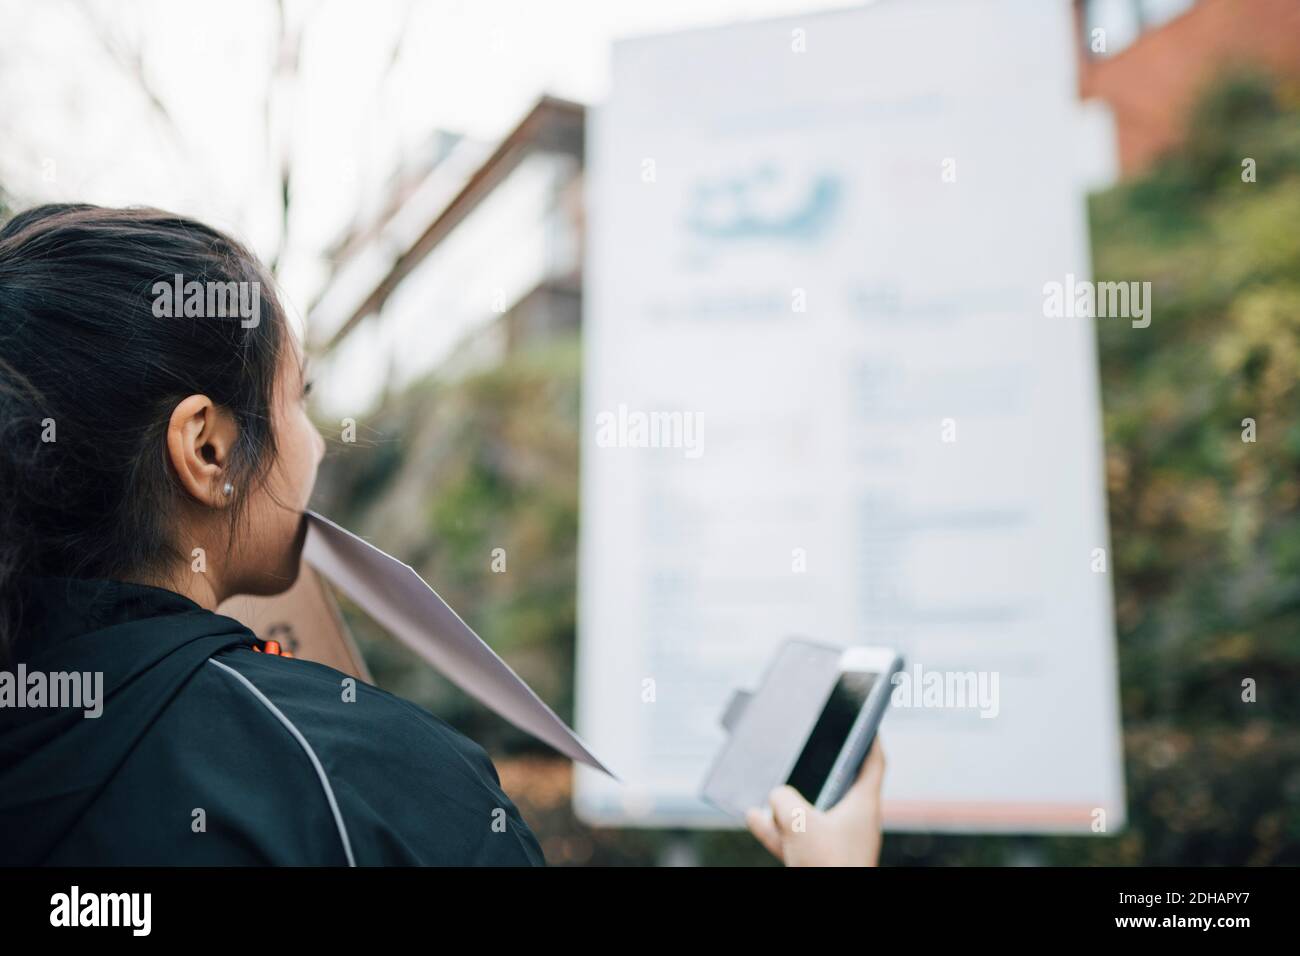 Female messenger carrying document in mouth and holding smart phone looking at billboard Stock Photo